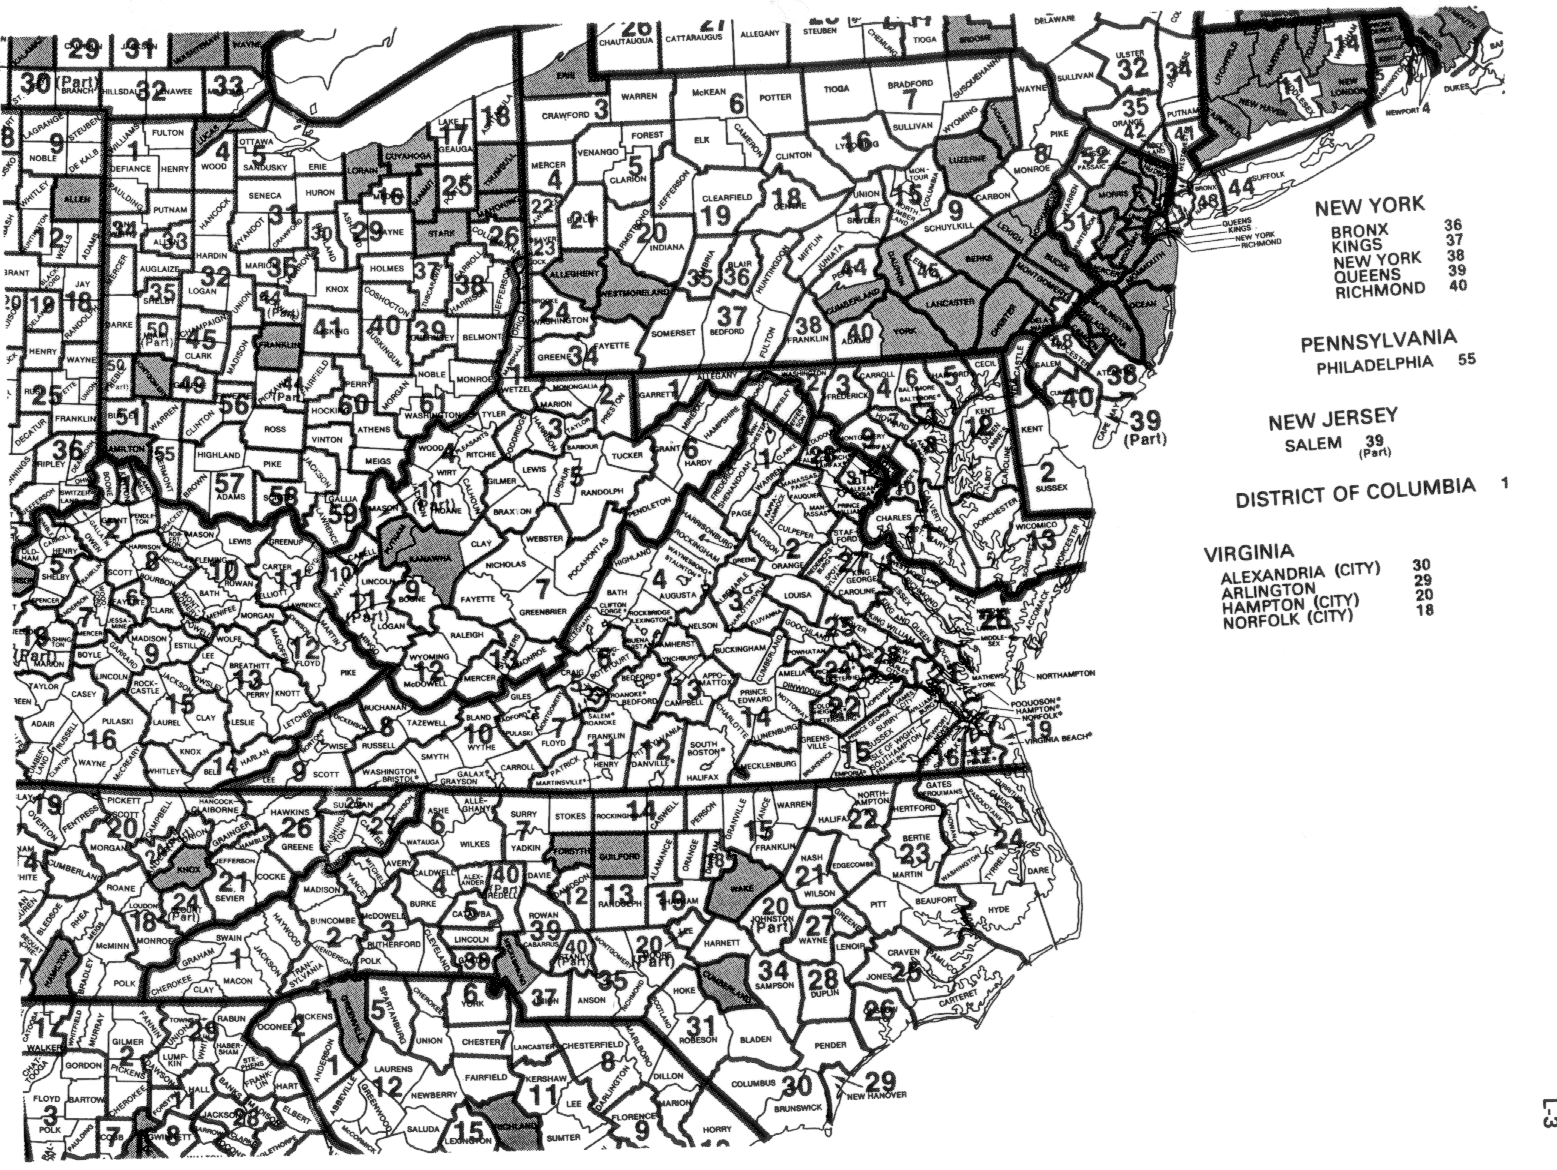 1980 County Groups, 5% State Sample: Map 2